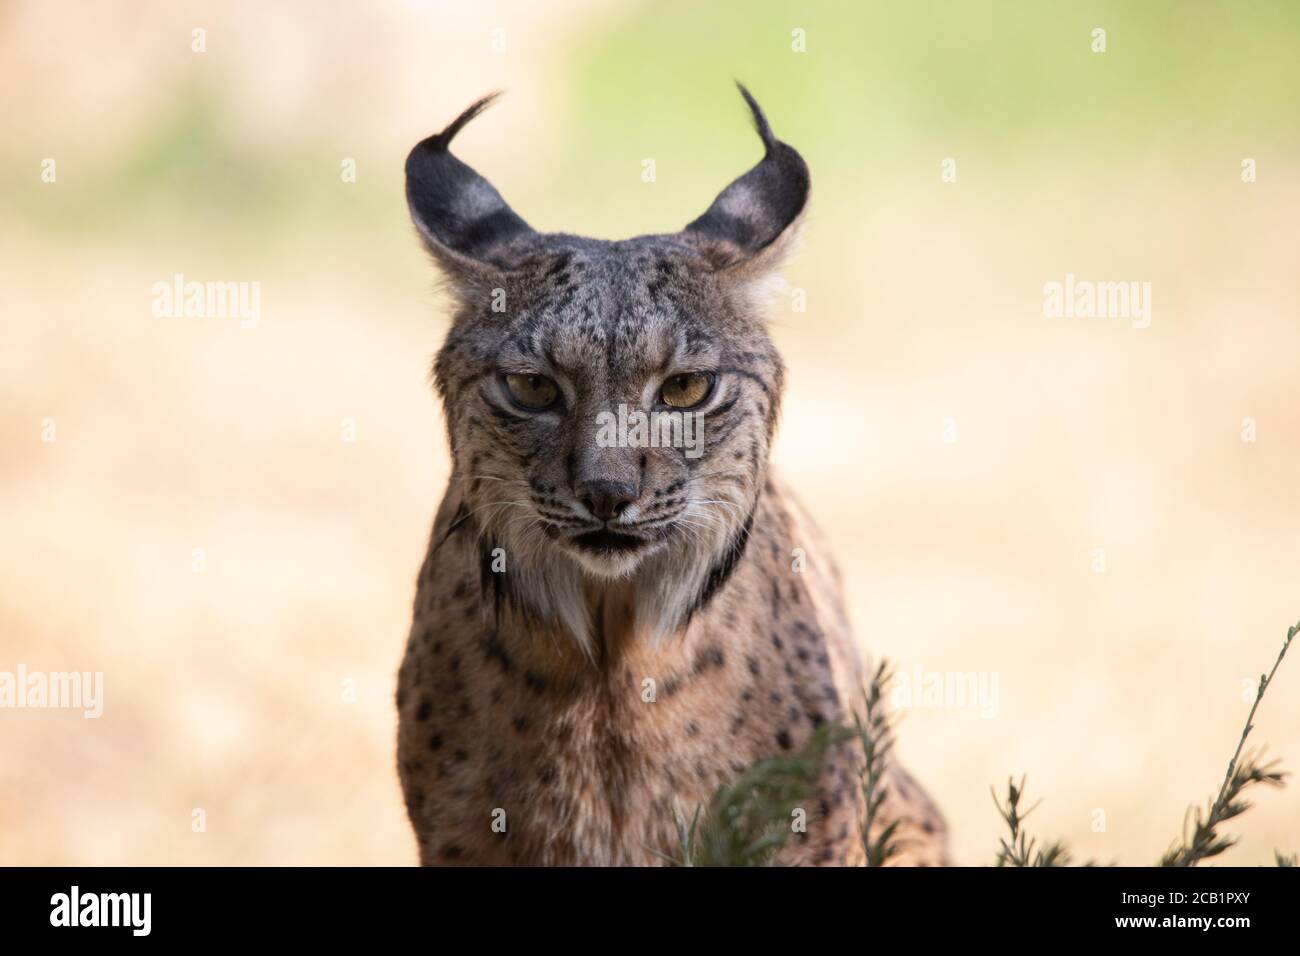 Facial portrait of a serene Iberian lynx looking straight ahead in the wild Stock Photo